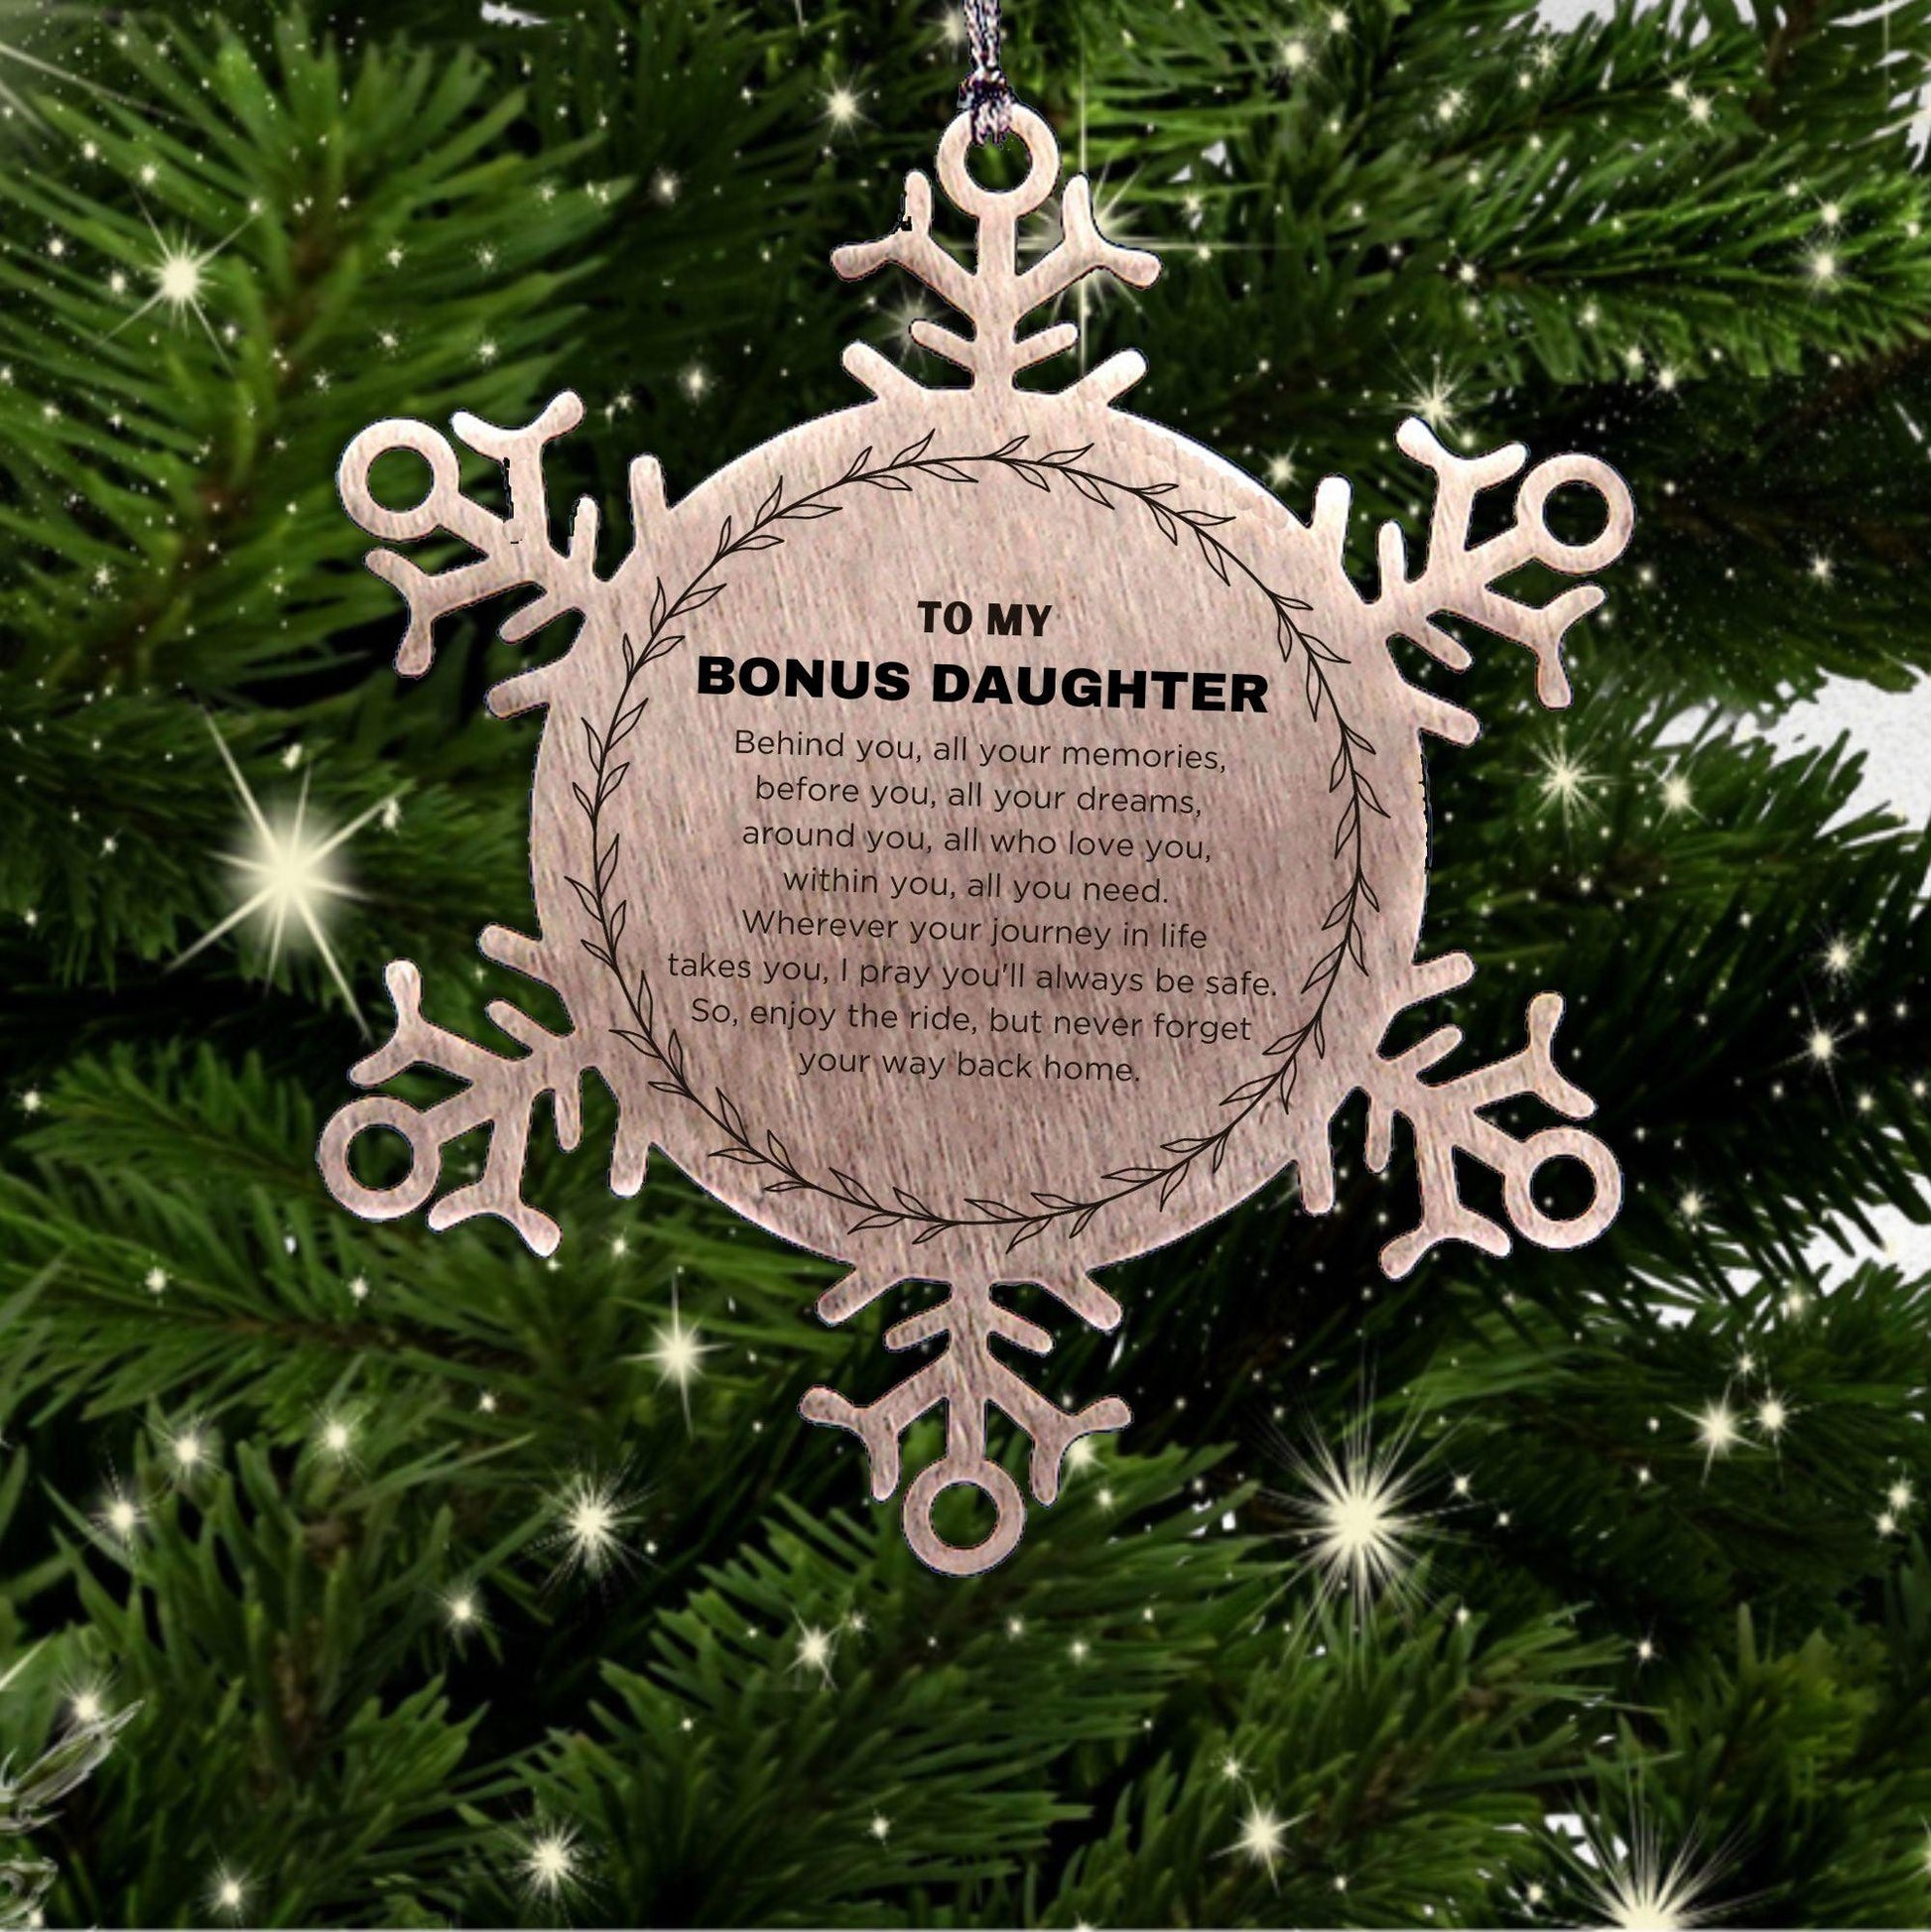 Inspirational Bonus Daughter Snowflake Ornament Sen - Behind you, all your Memories, Before you, all your Dreams - Birthday, Christmas Holiday Gifts - Mallard Moon Gift Shop